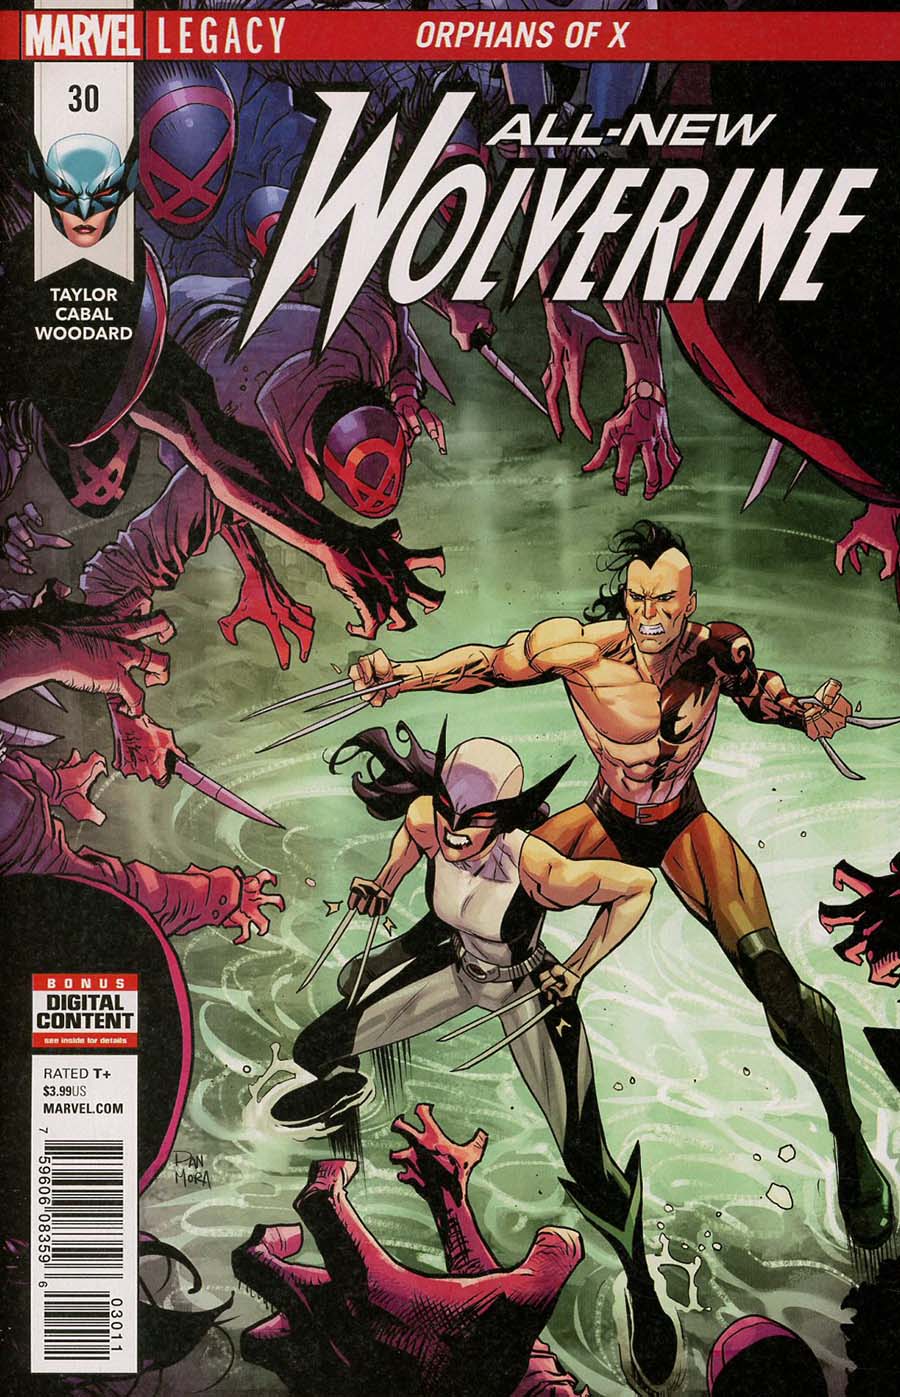 All-New Wolverine #30 (Marvel Legacy Tie-In)